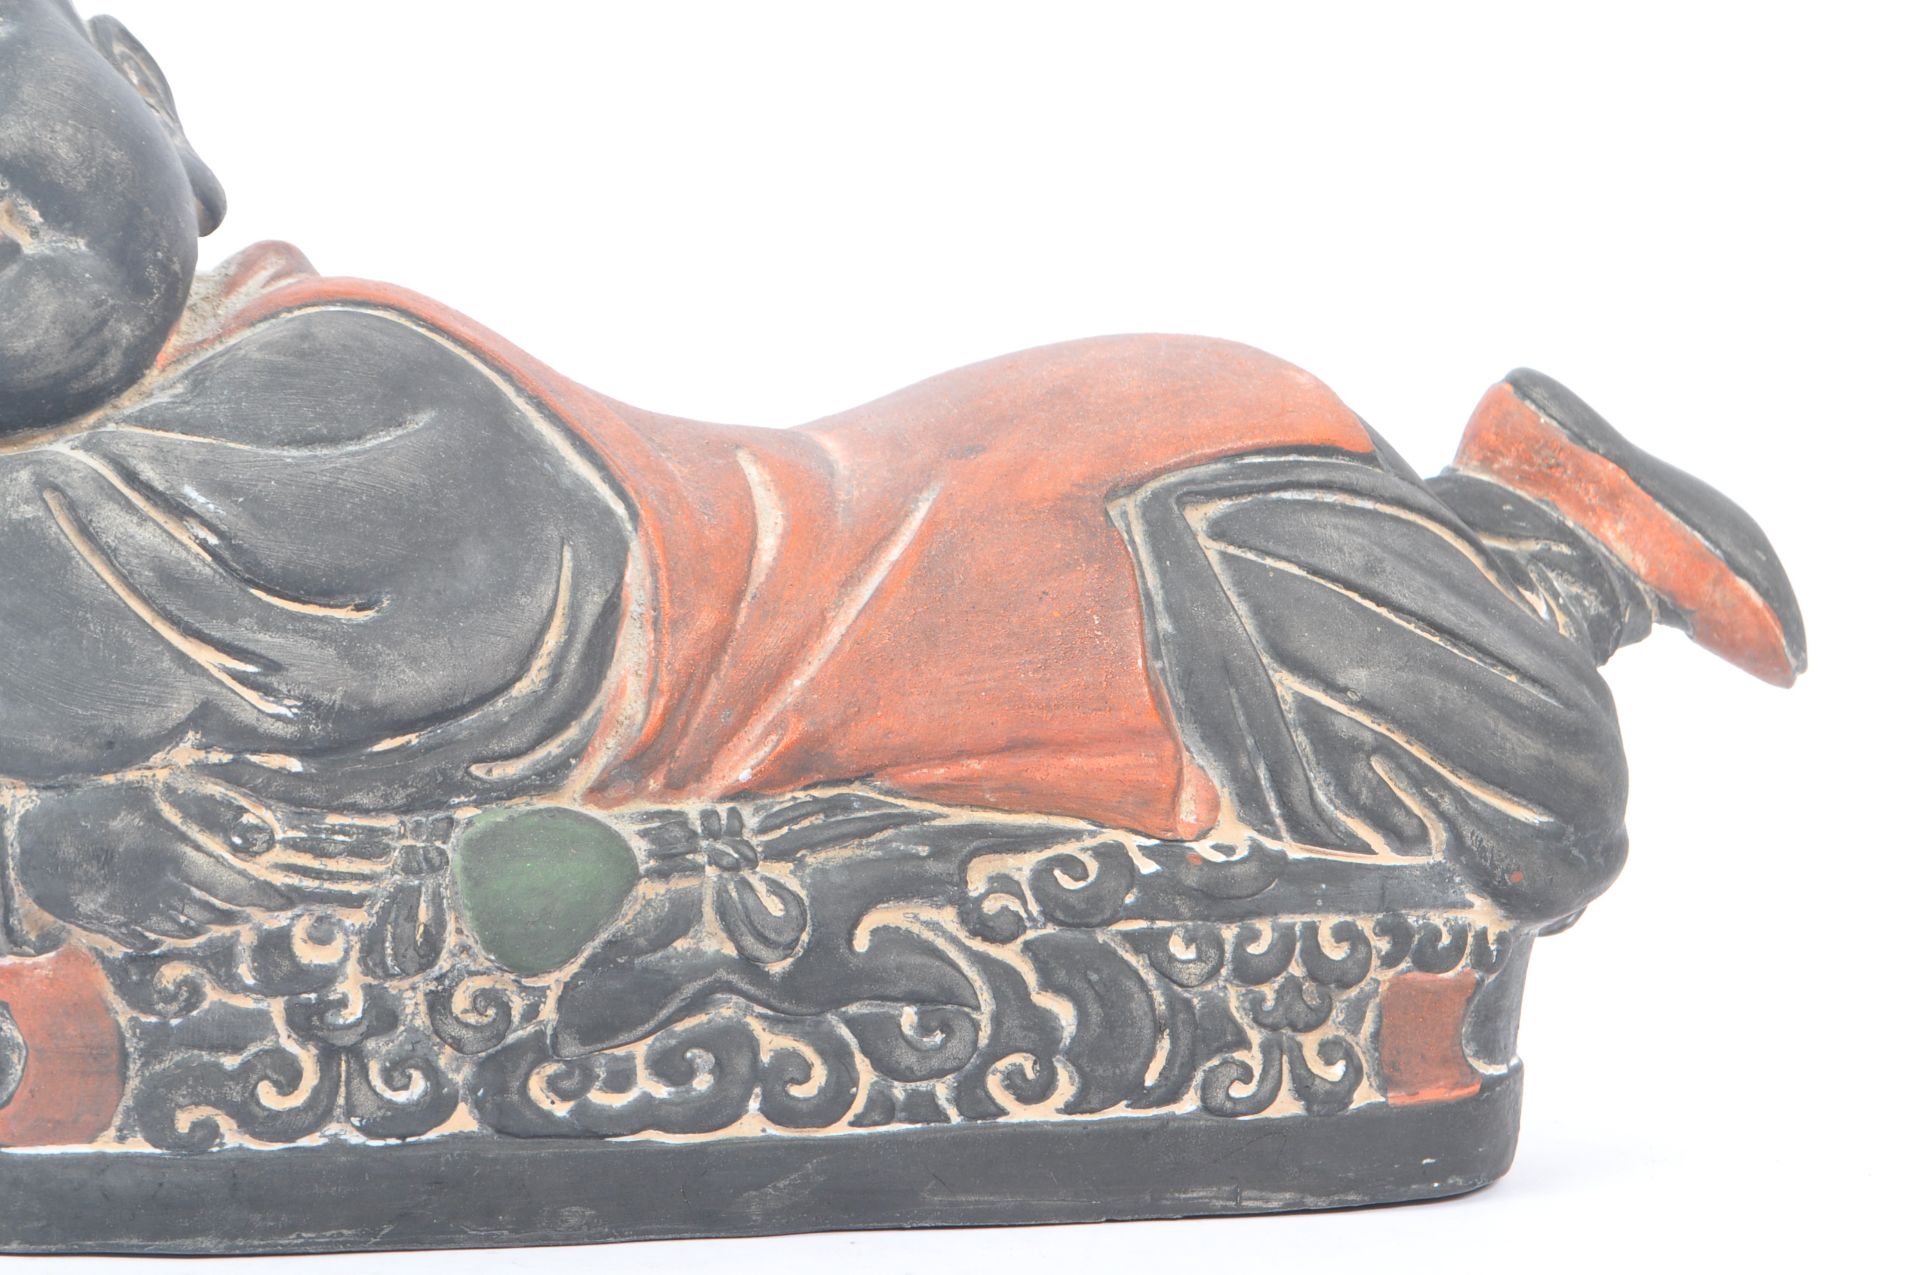 EARLY 20TH CENTURY CHINESE CERAMIC PILLOW FIGURE - Image 6 of 6